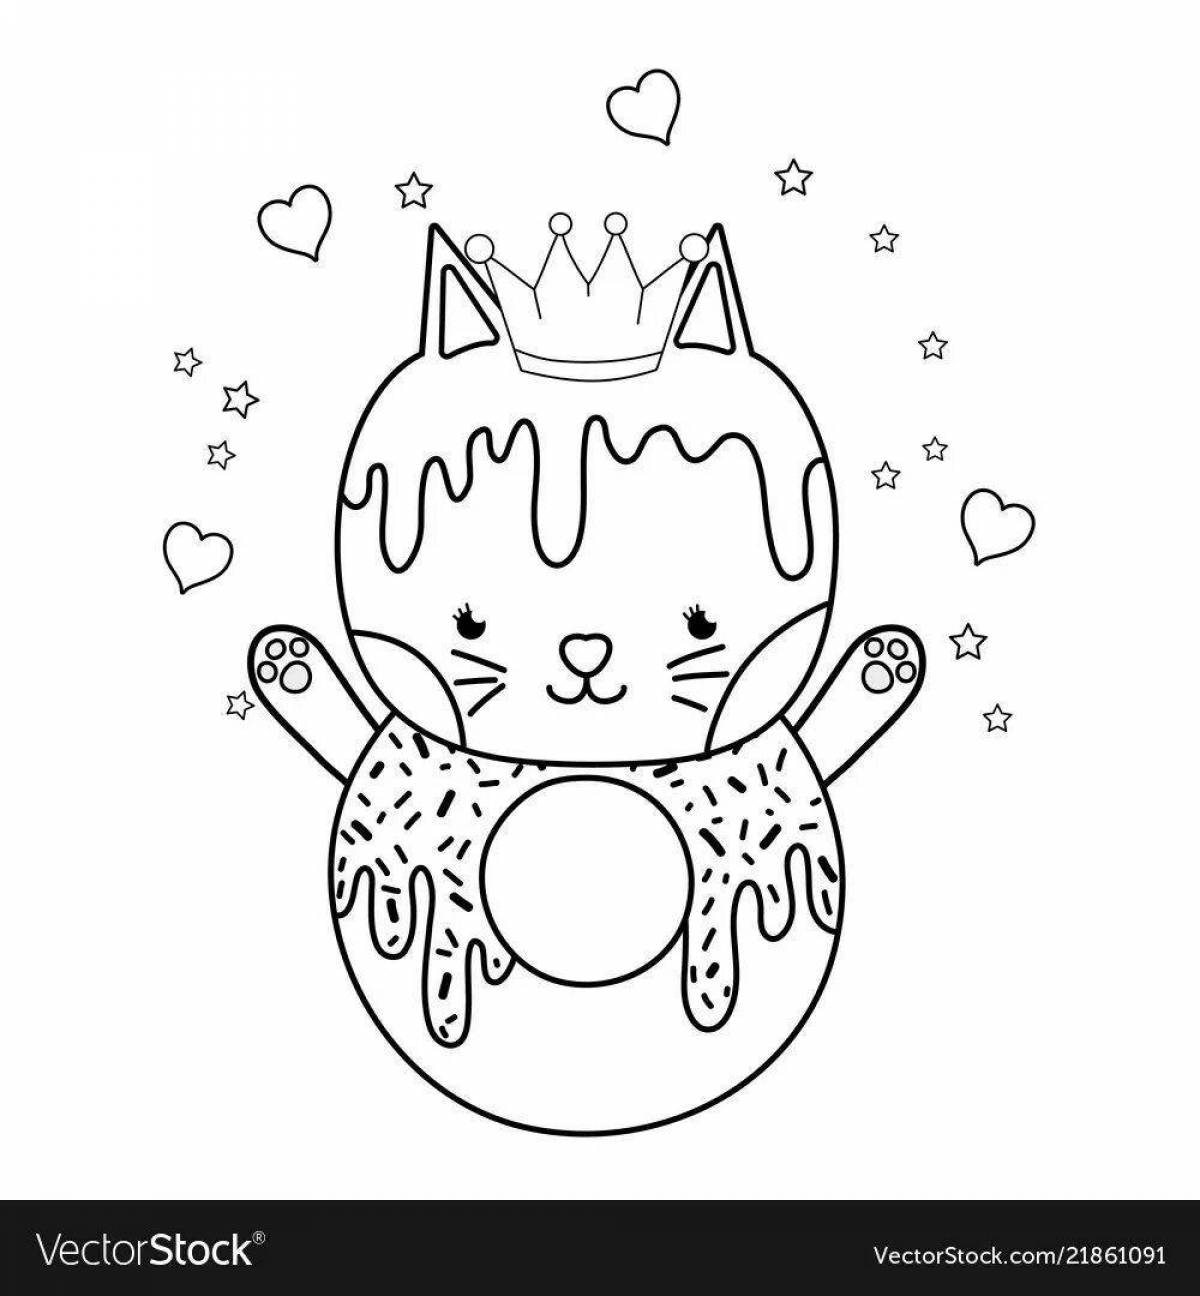 Exciting donut cat coloring book